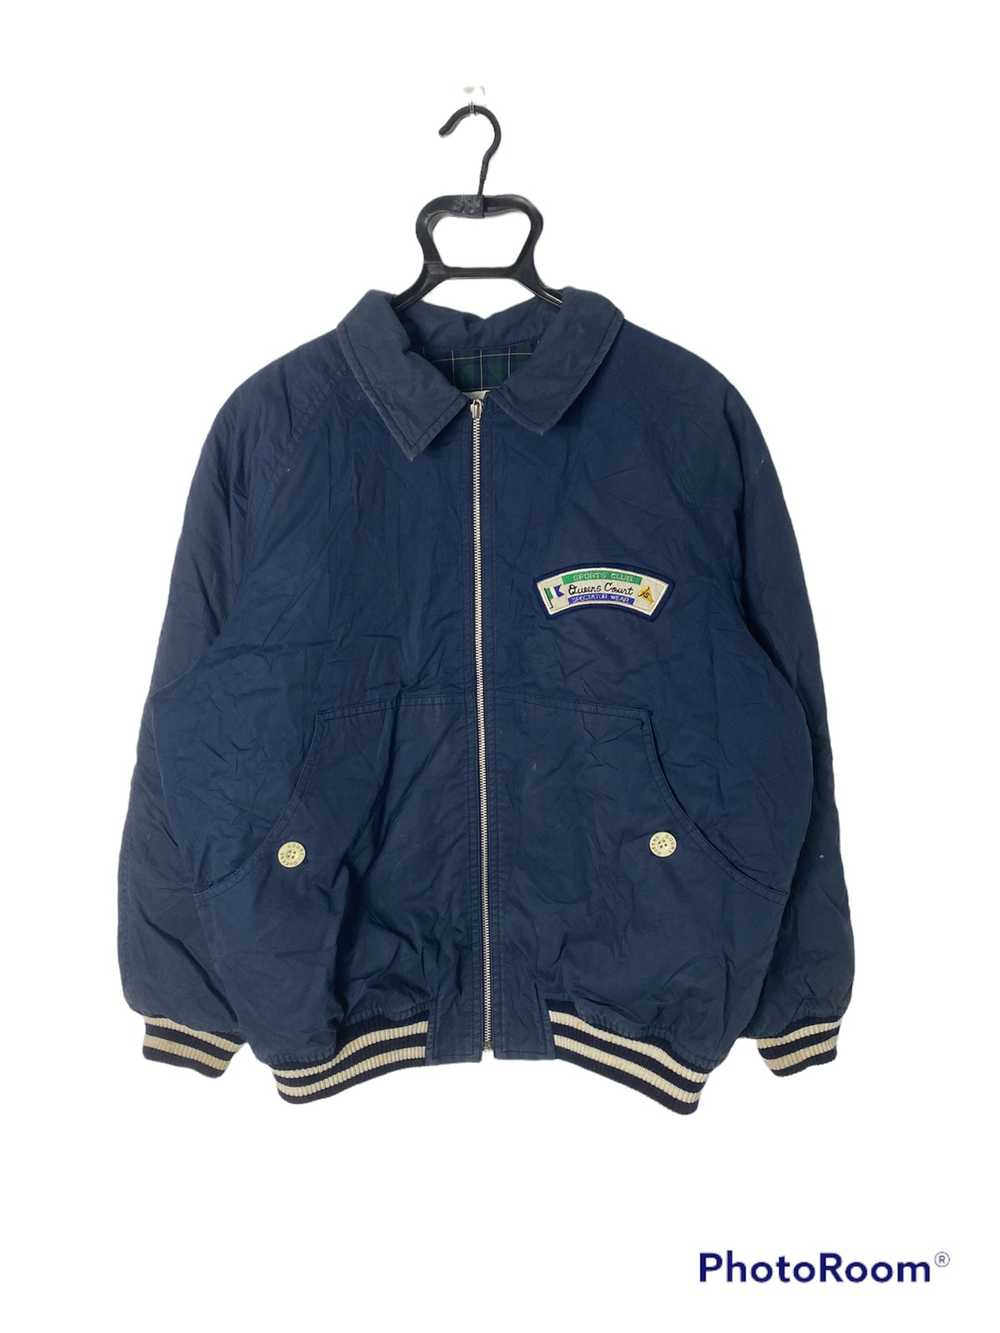 Japanese Brand - Queens Court Bomber Jacket - image 2